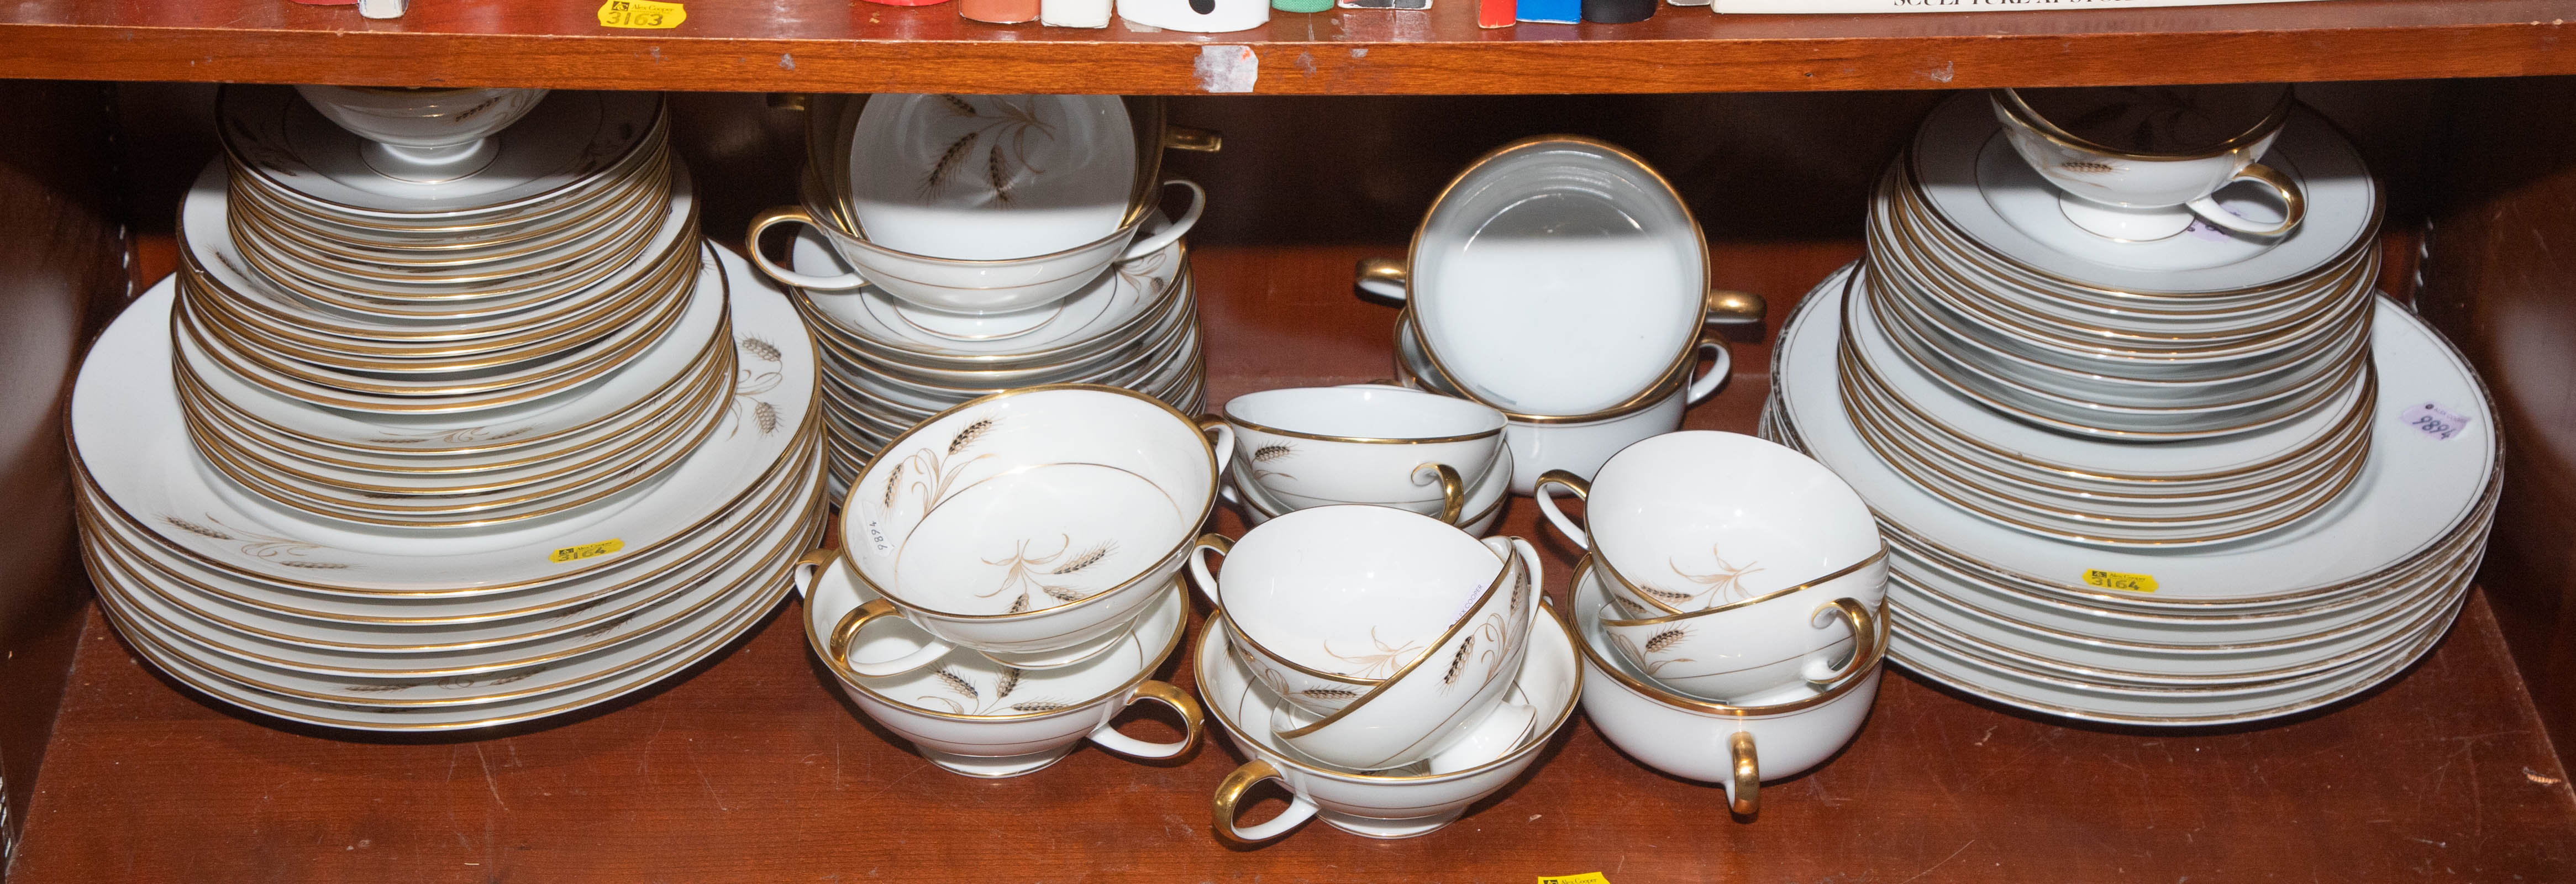 PARTIAL SET OF ROSENTHAL DINNER CHINA